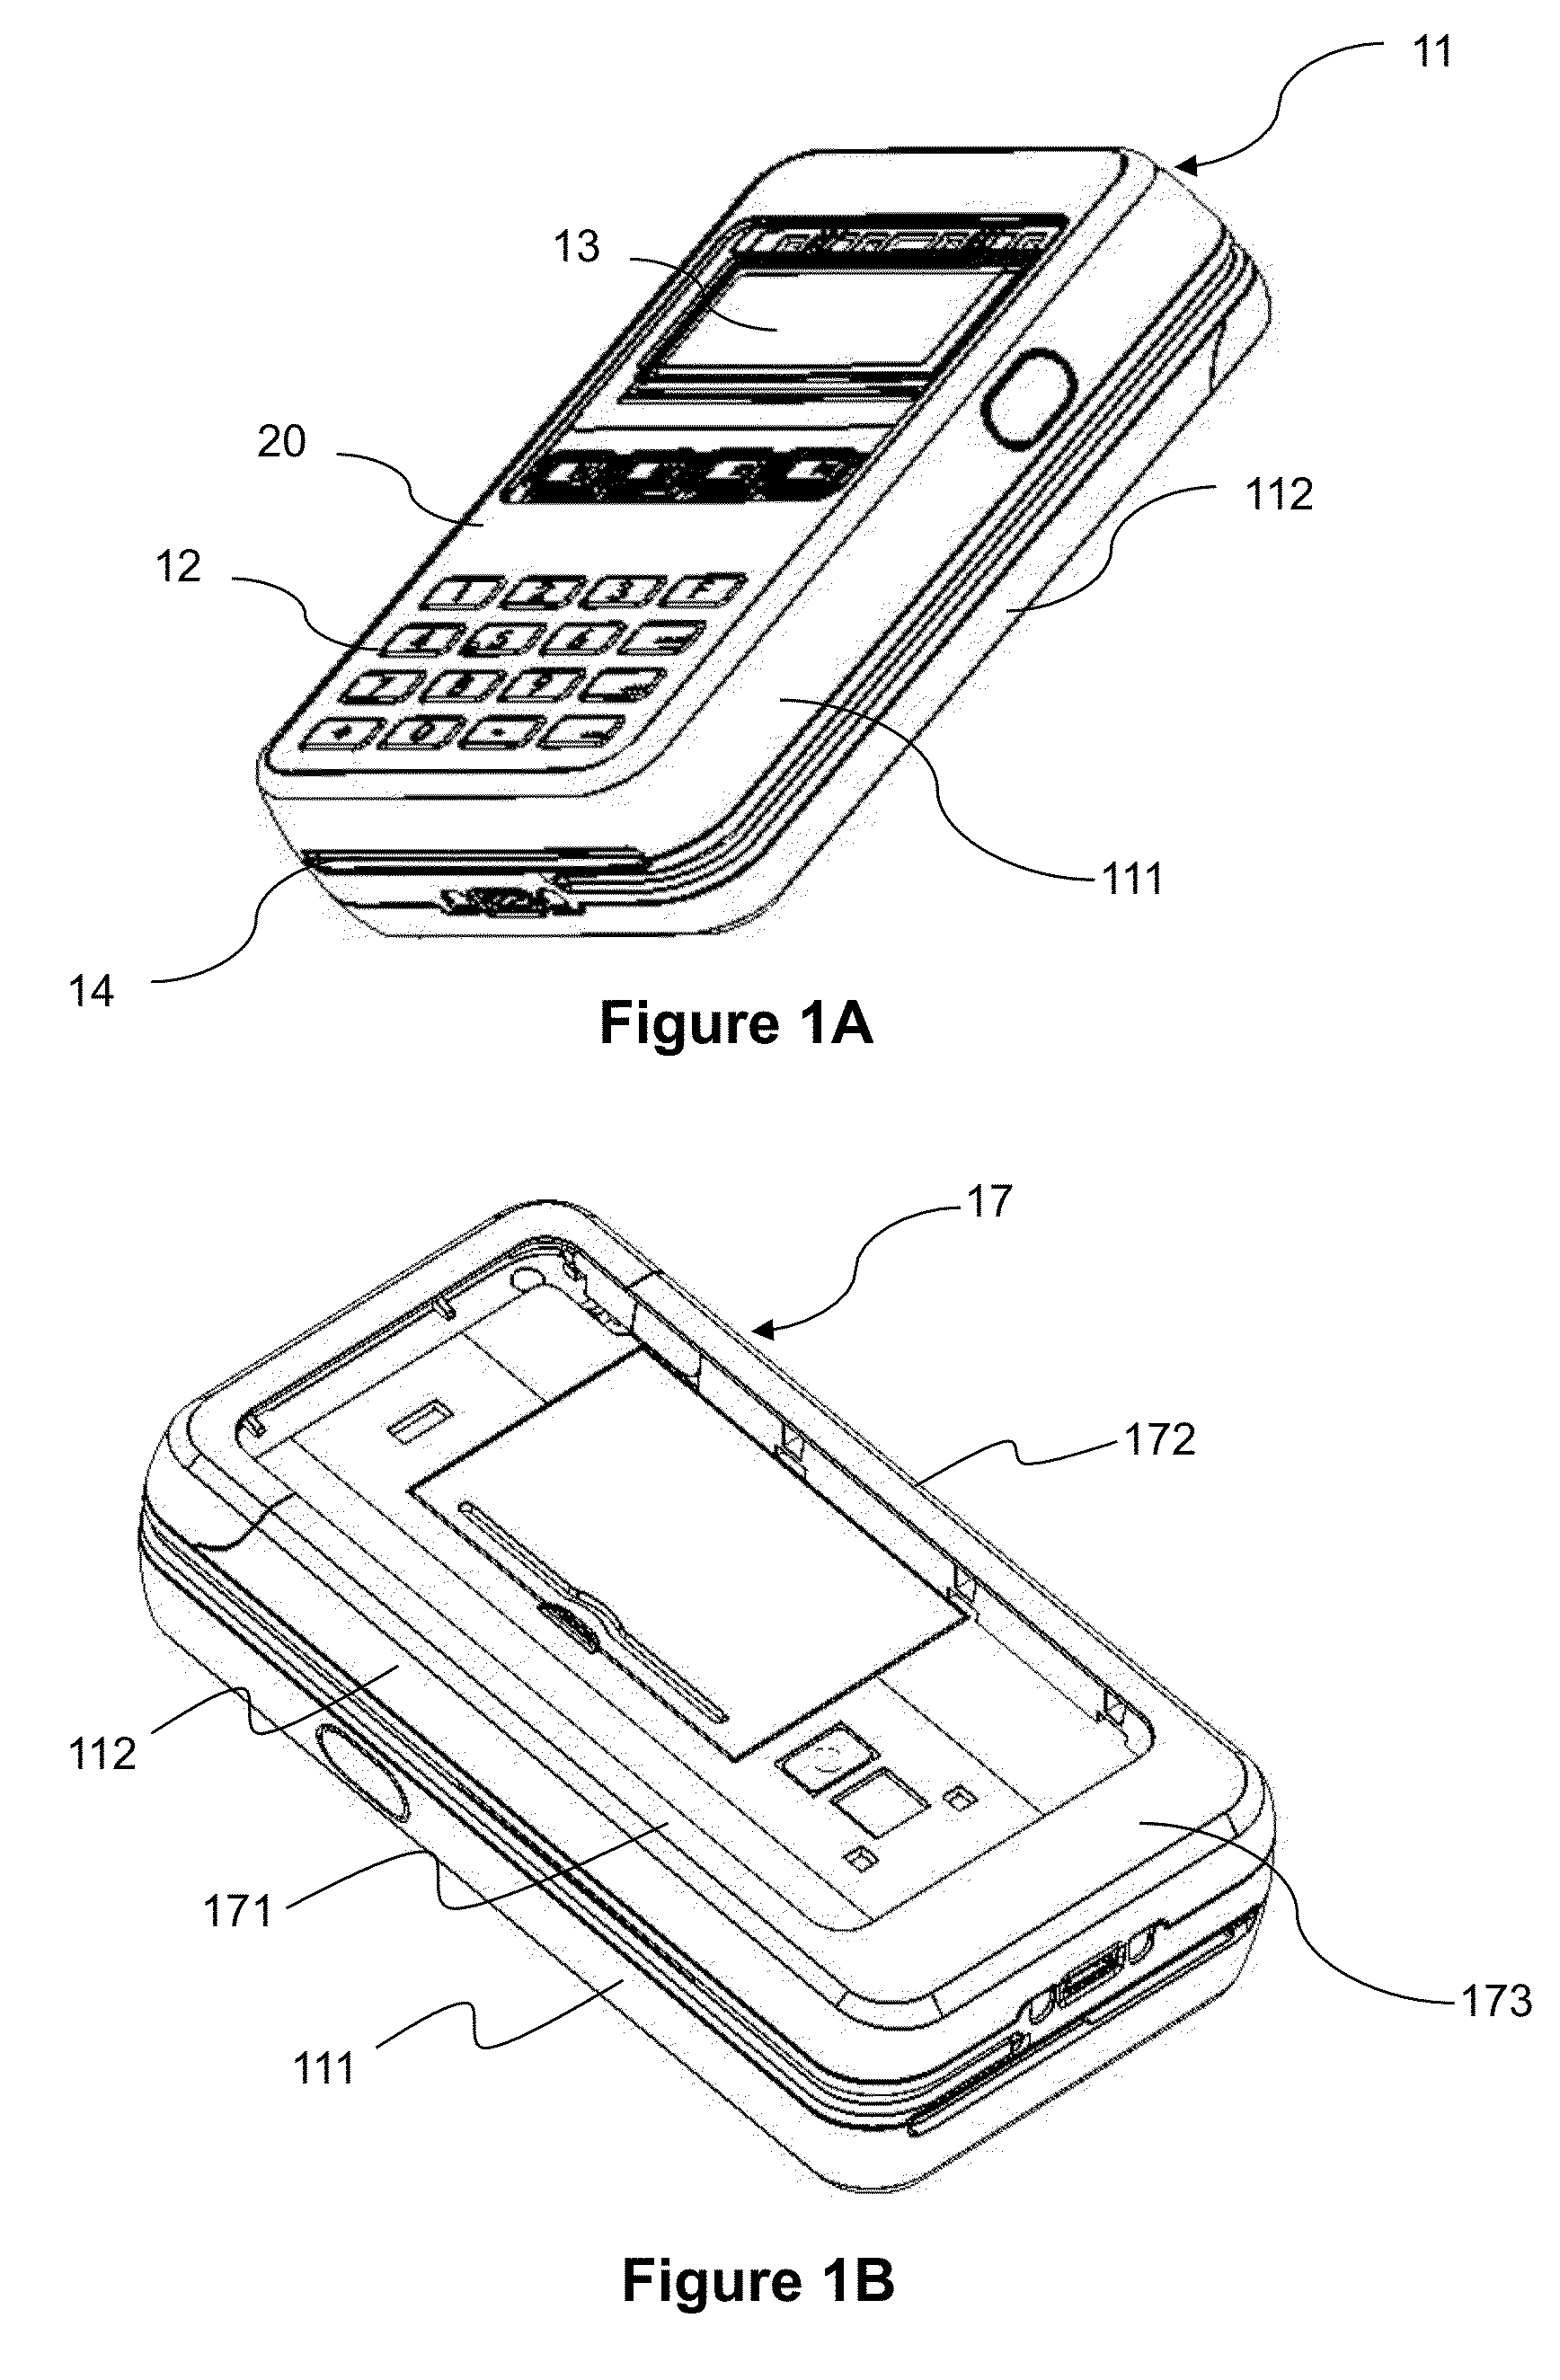 Electronic payment device able to receive and hold a portable telephone